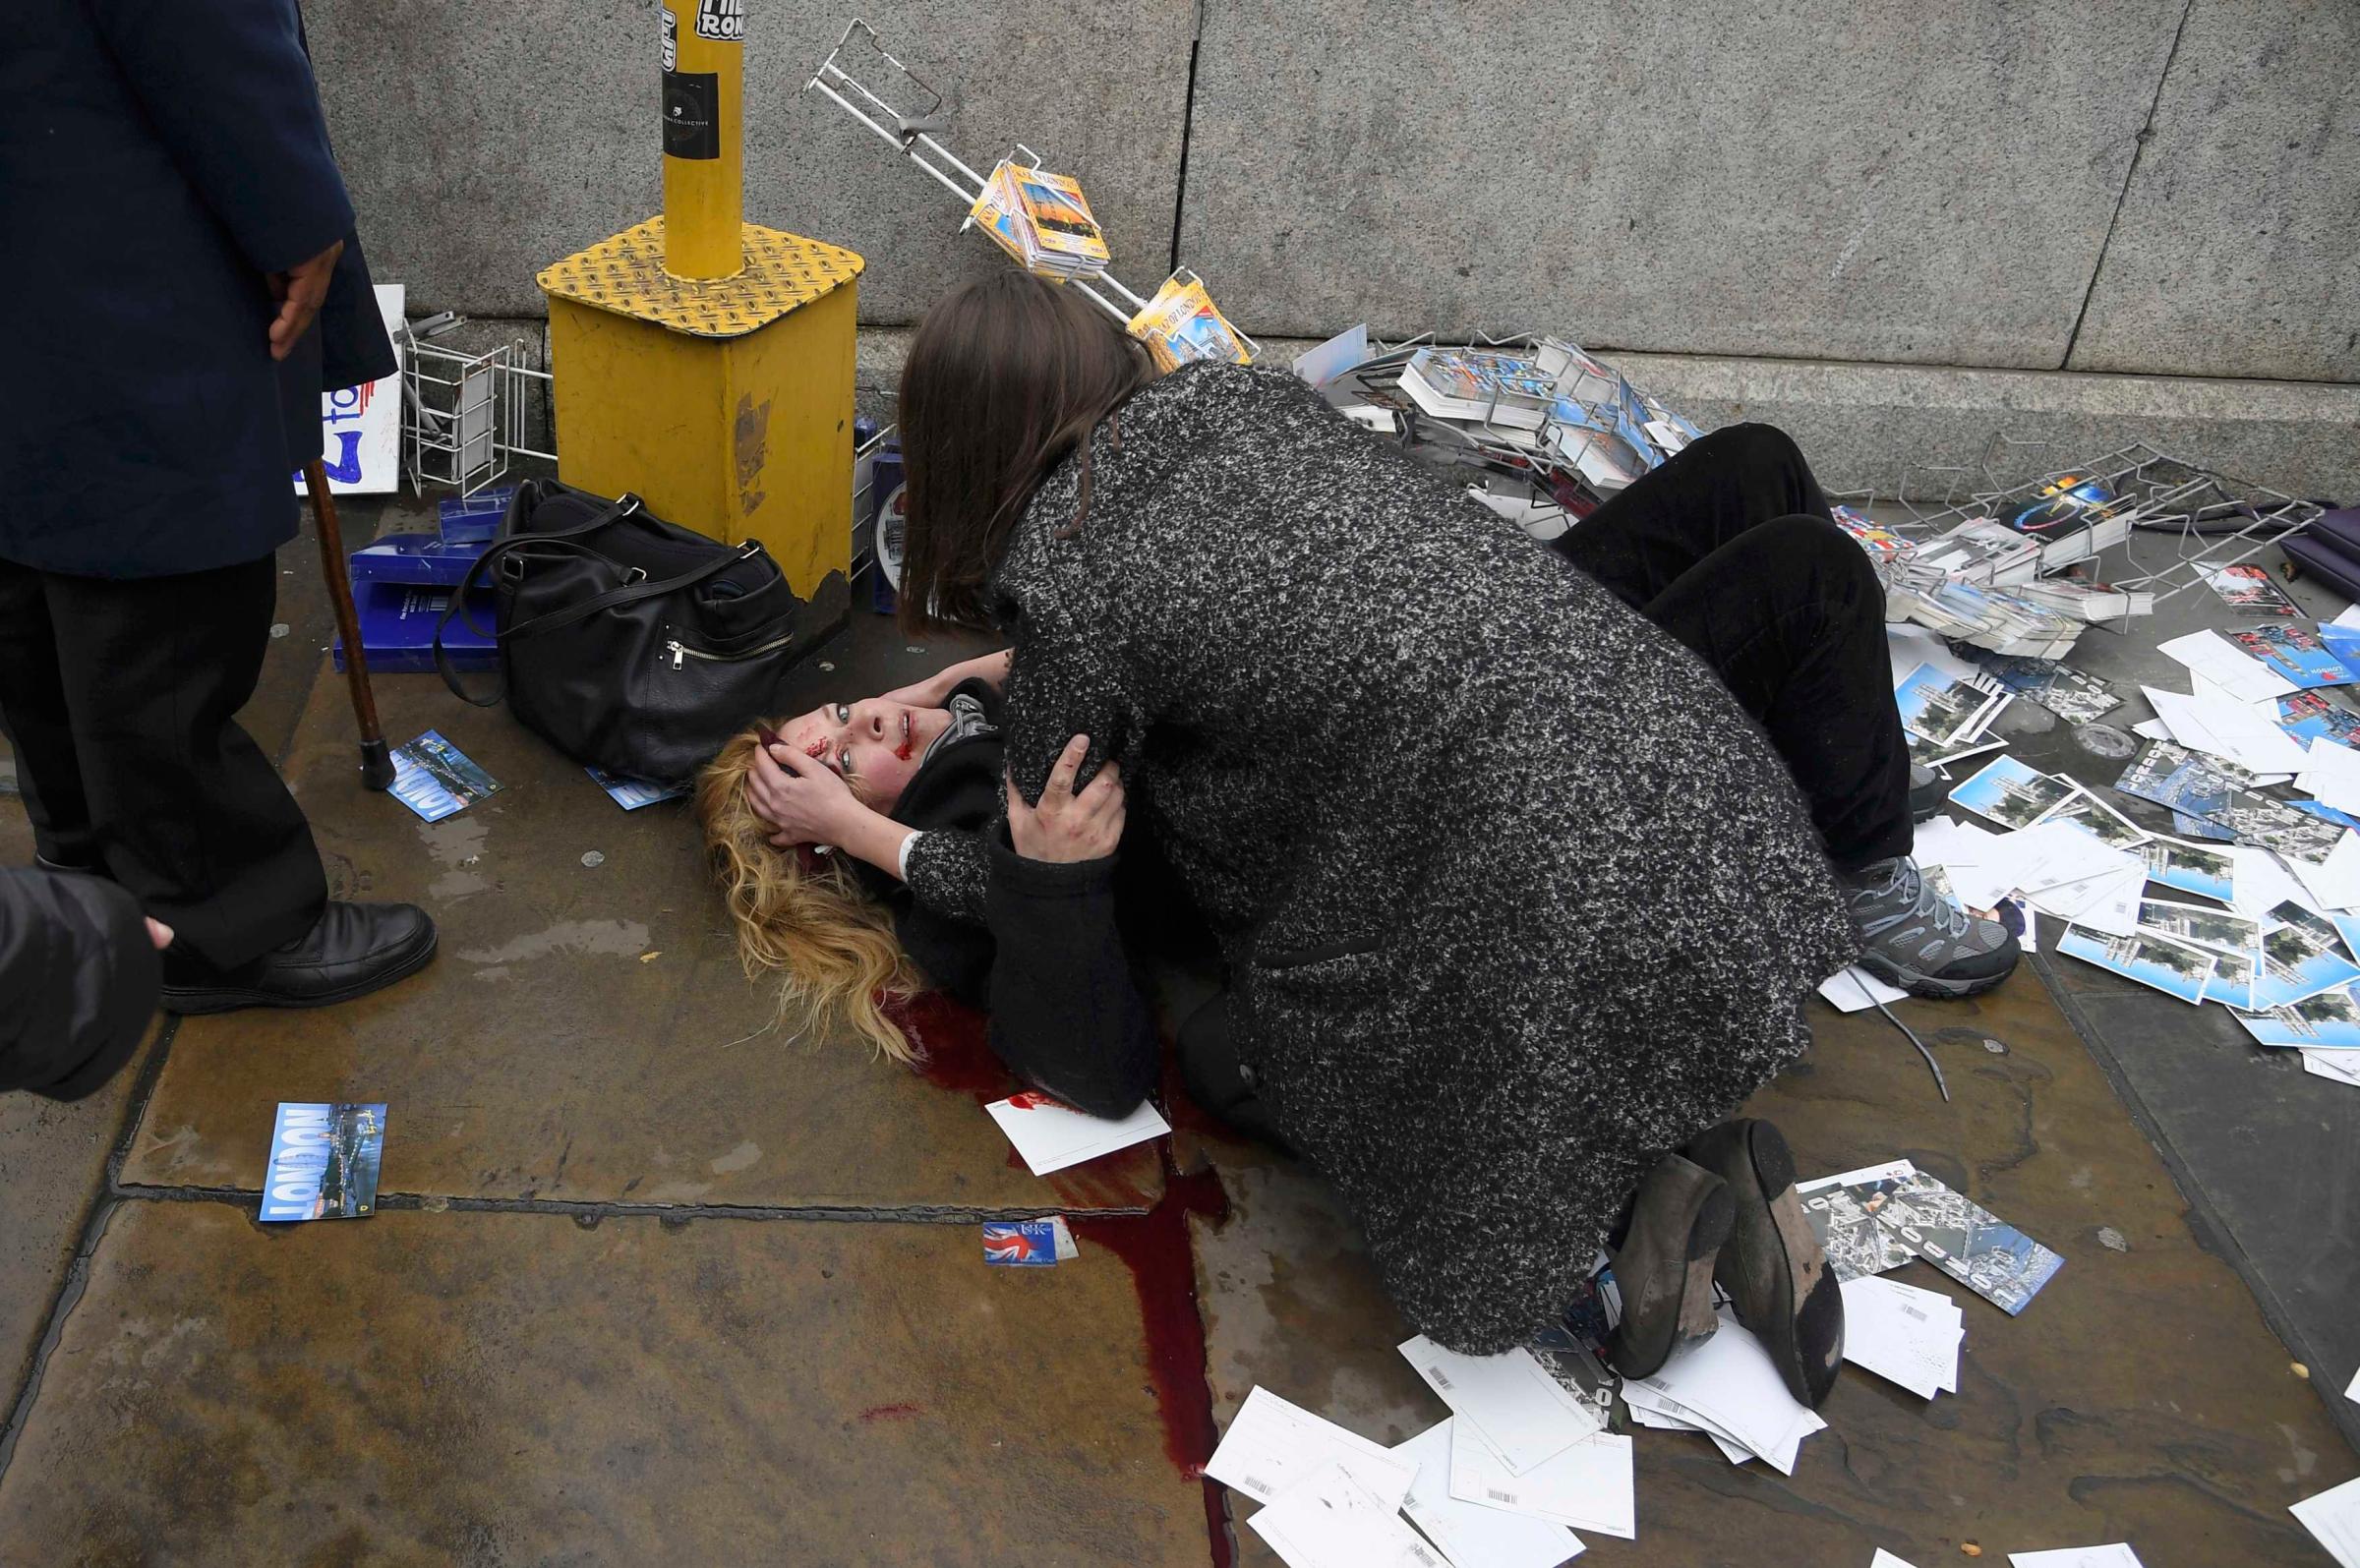 A woman lies injured after a shotting incident on Westminster Bridge in London